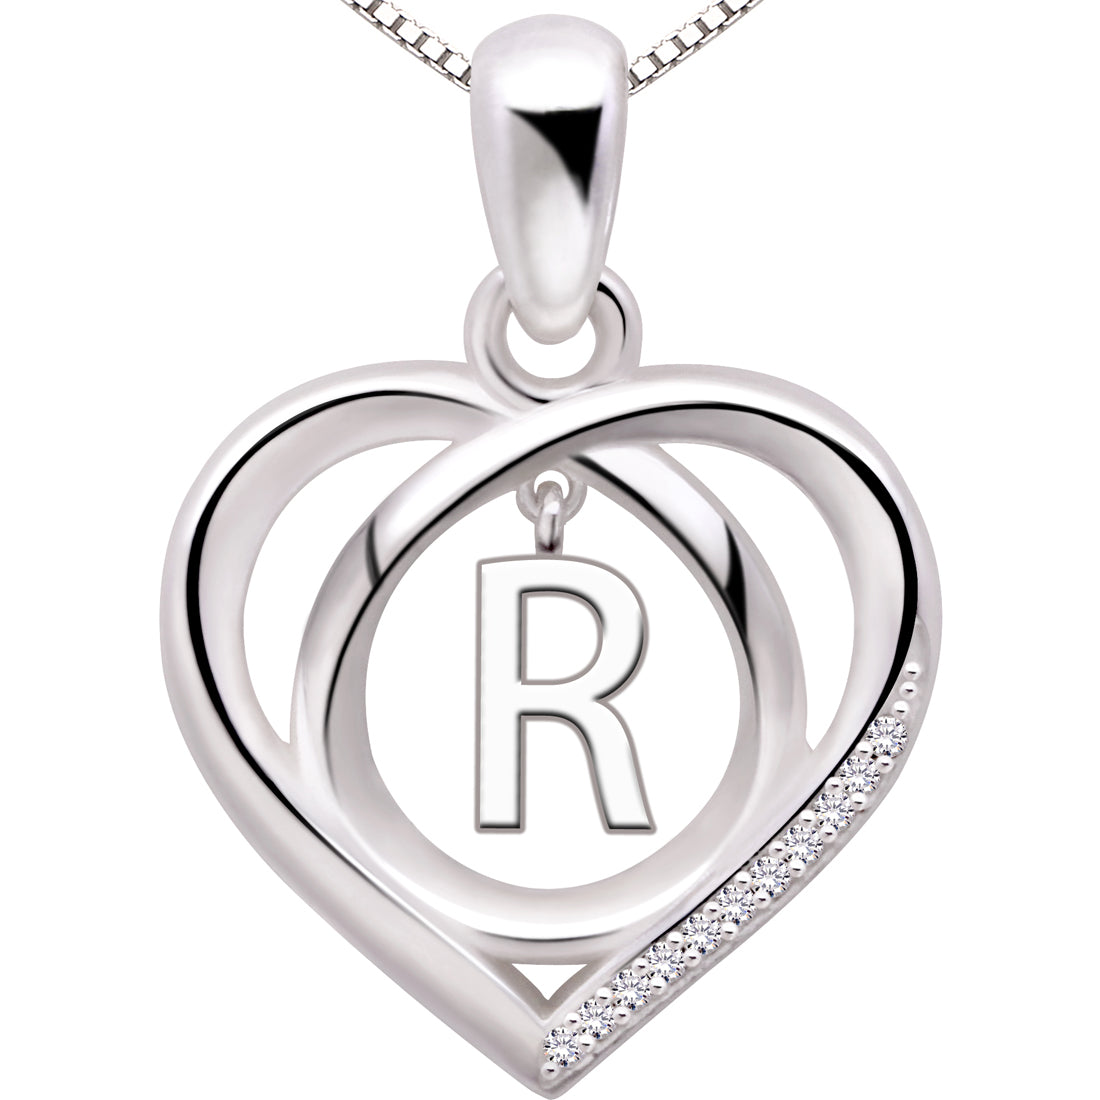 ALOV Jewelry Sterling Silver Initial Letter Alphabet Love Heart Cubic Zirconia Pendant Necklace